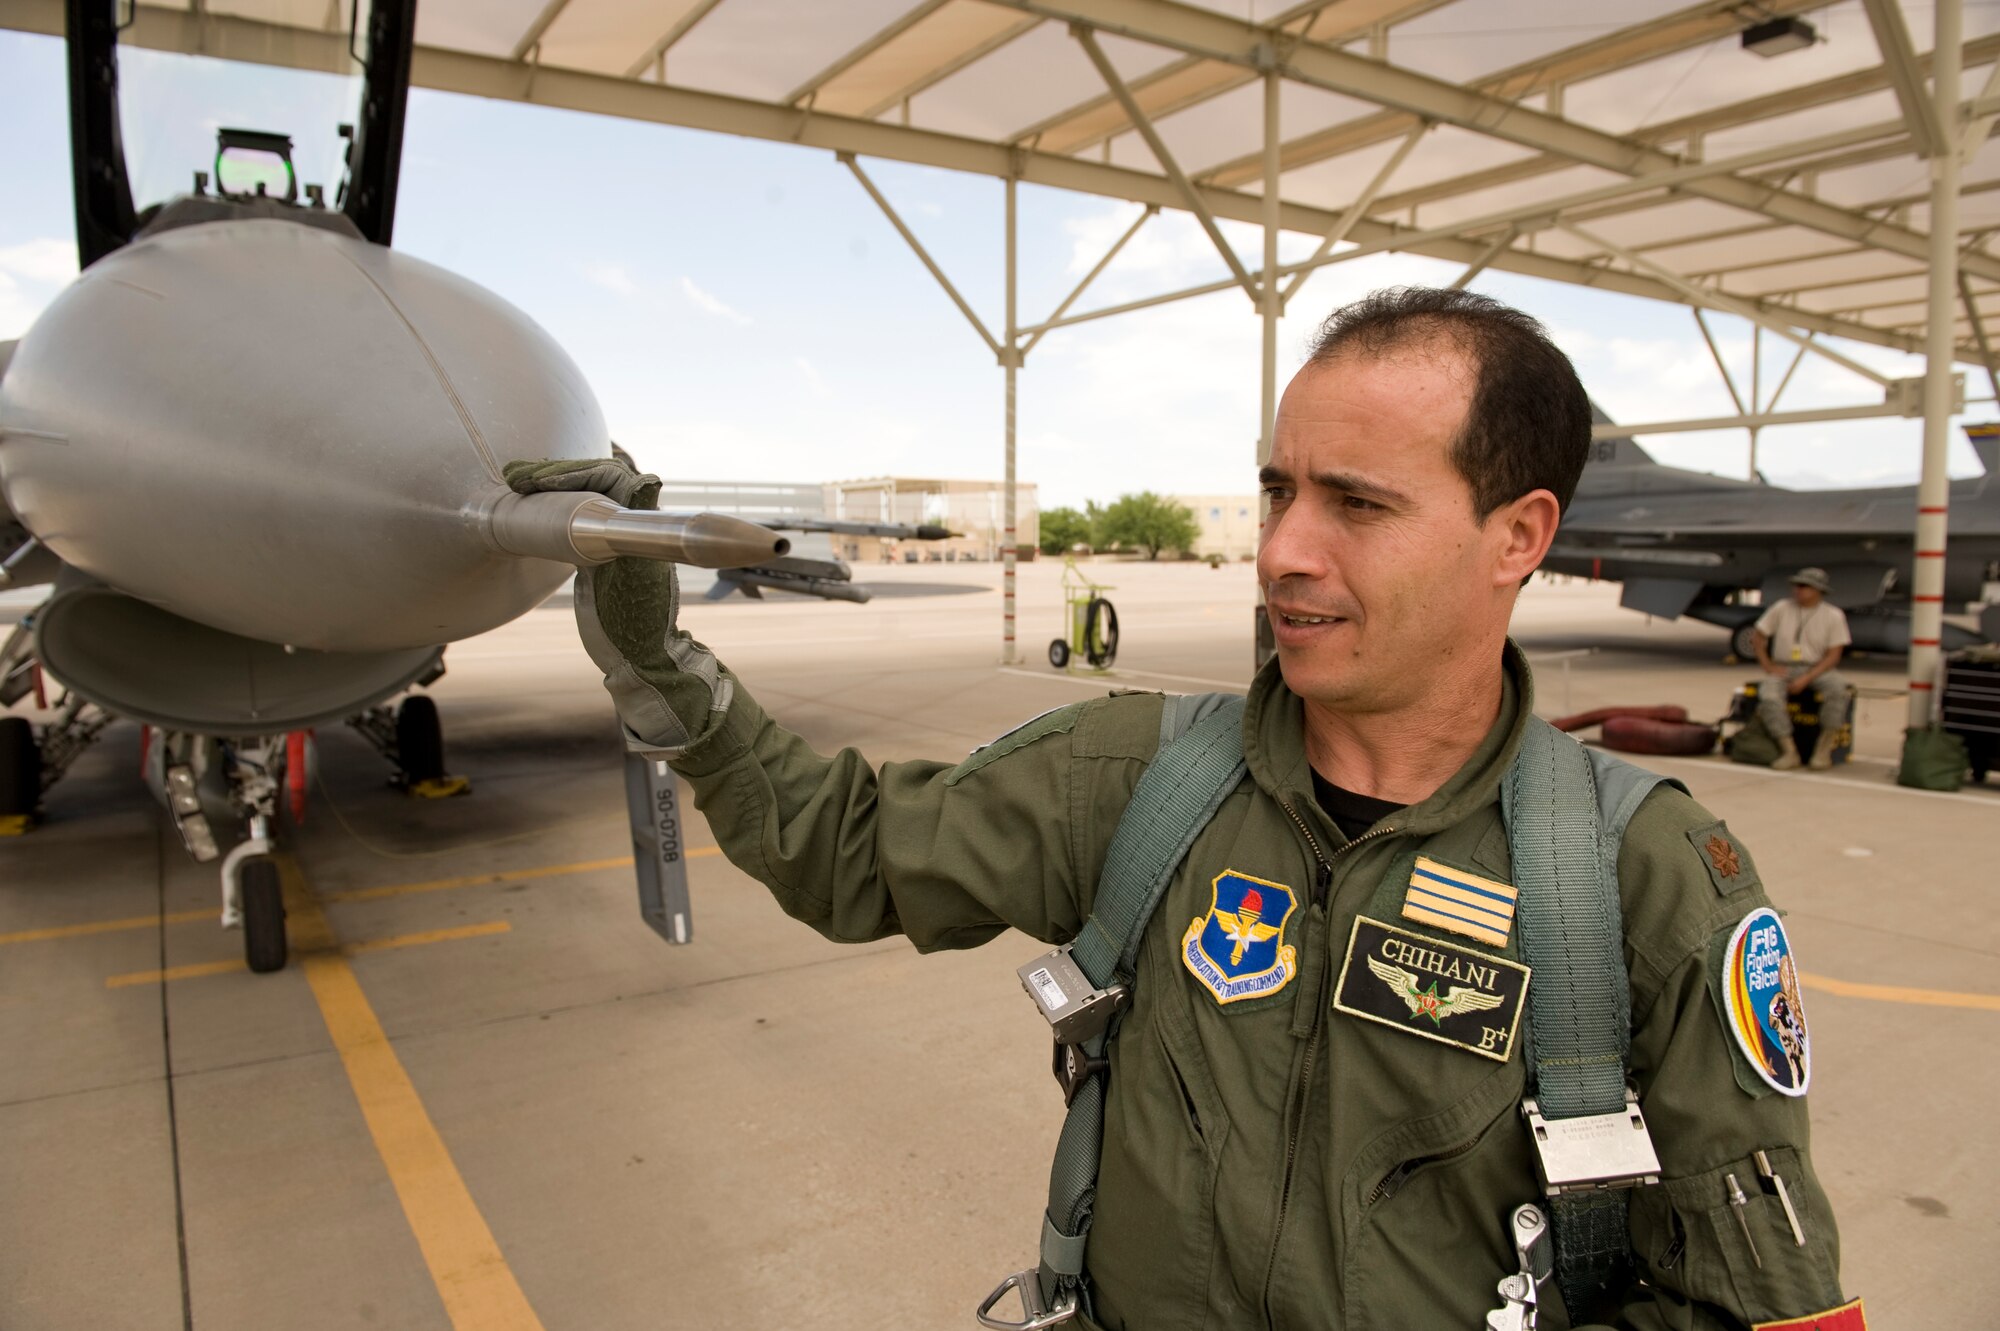 Royal Moroccan Air Force Maj. Mouloud Chihani performs a preflight check on an F-16 Fighting Falcon at Tucson International Airport before a training mission July 7, 2010. Chihani and three other Moroccan pilots are the first F-16 pilots in their air force and will lead the way to establish a new squadron of block 52s when they return home this July. (U.S. Air Force photo/Master Sgt. Jack Braden)